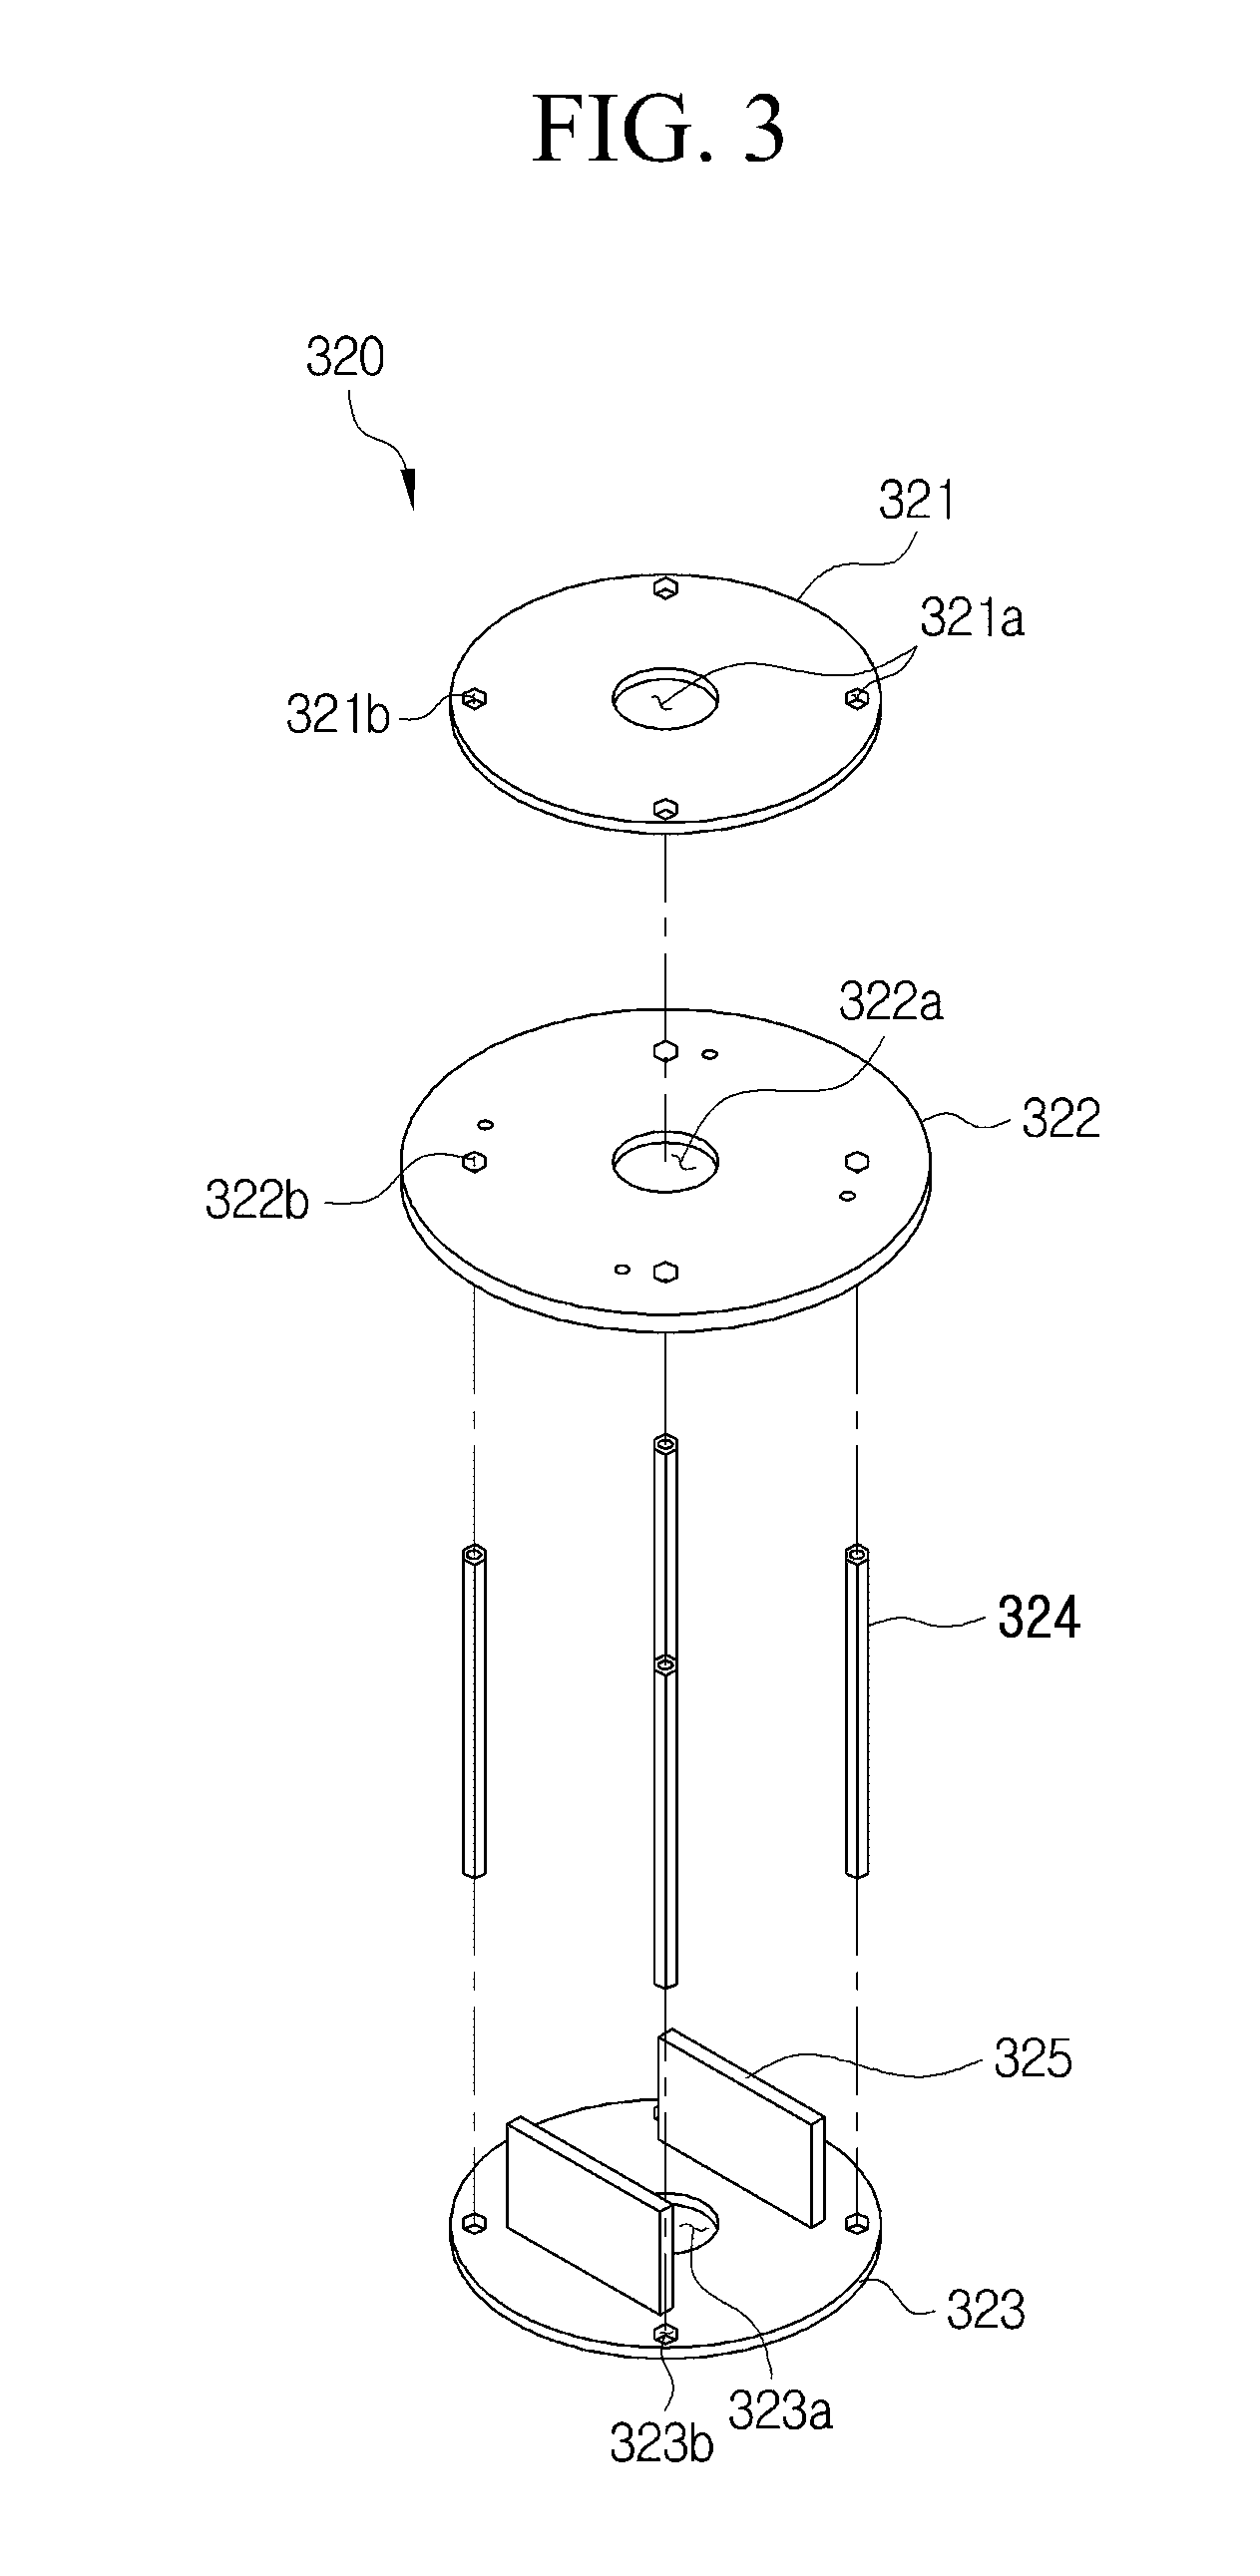 Built-in type vision based inspection tool for autonomous setting of initial origin